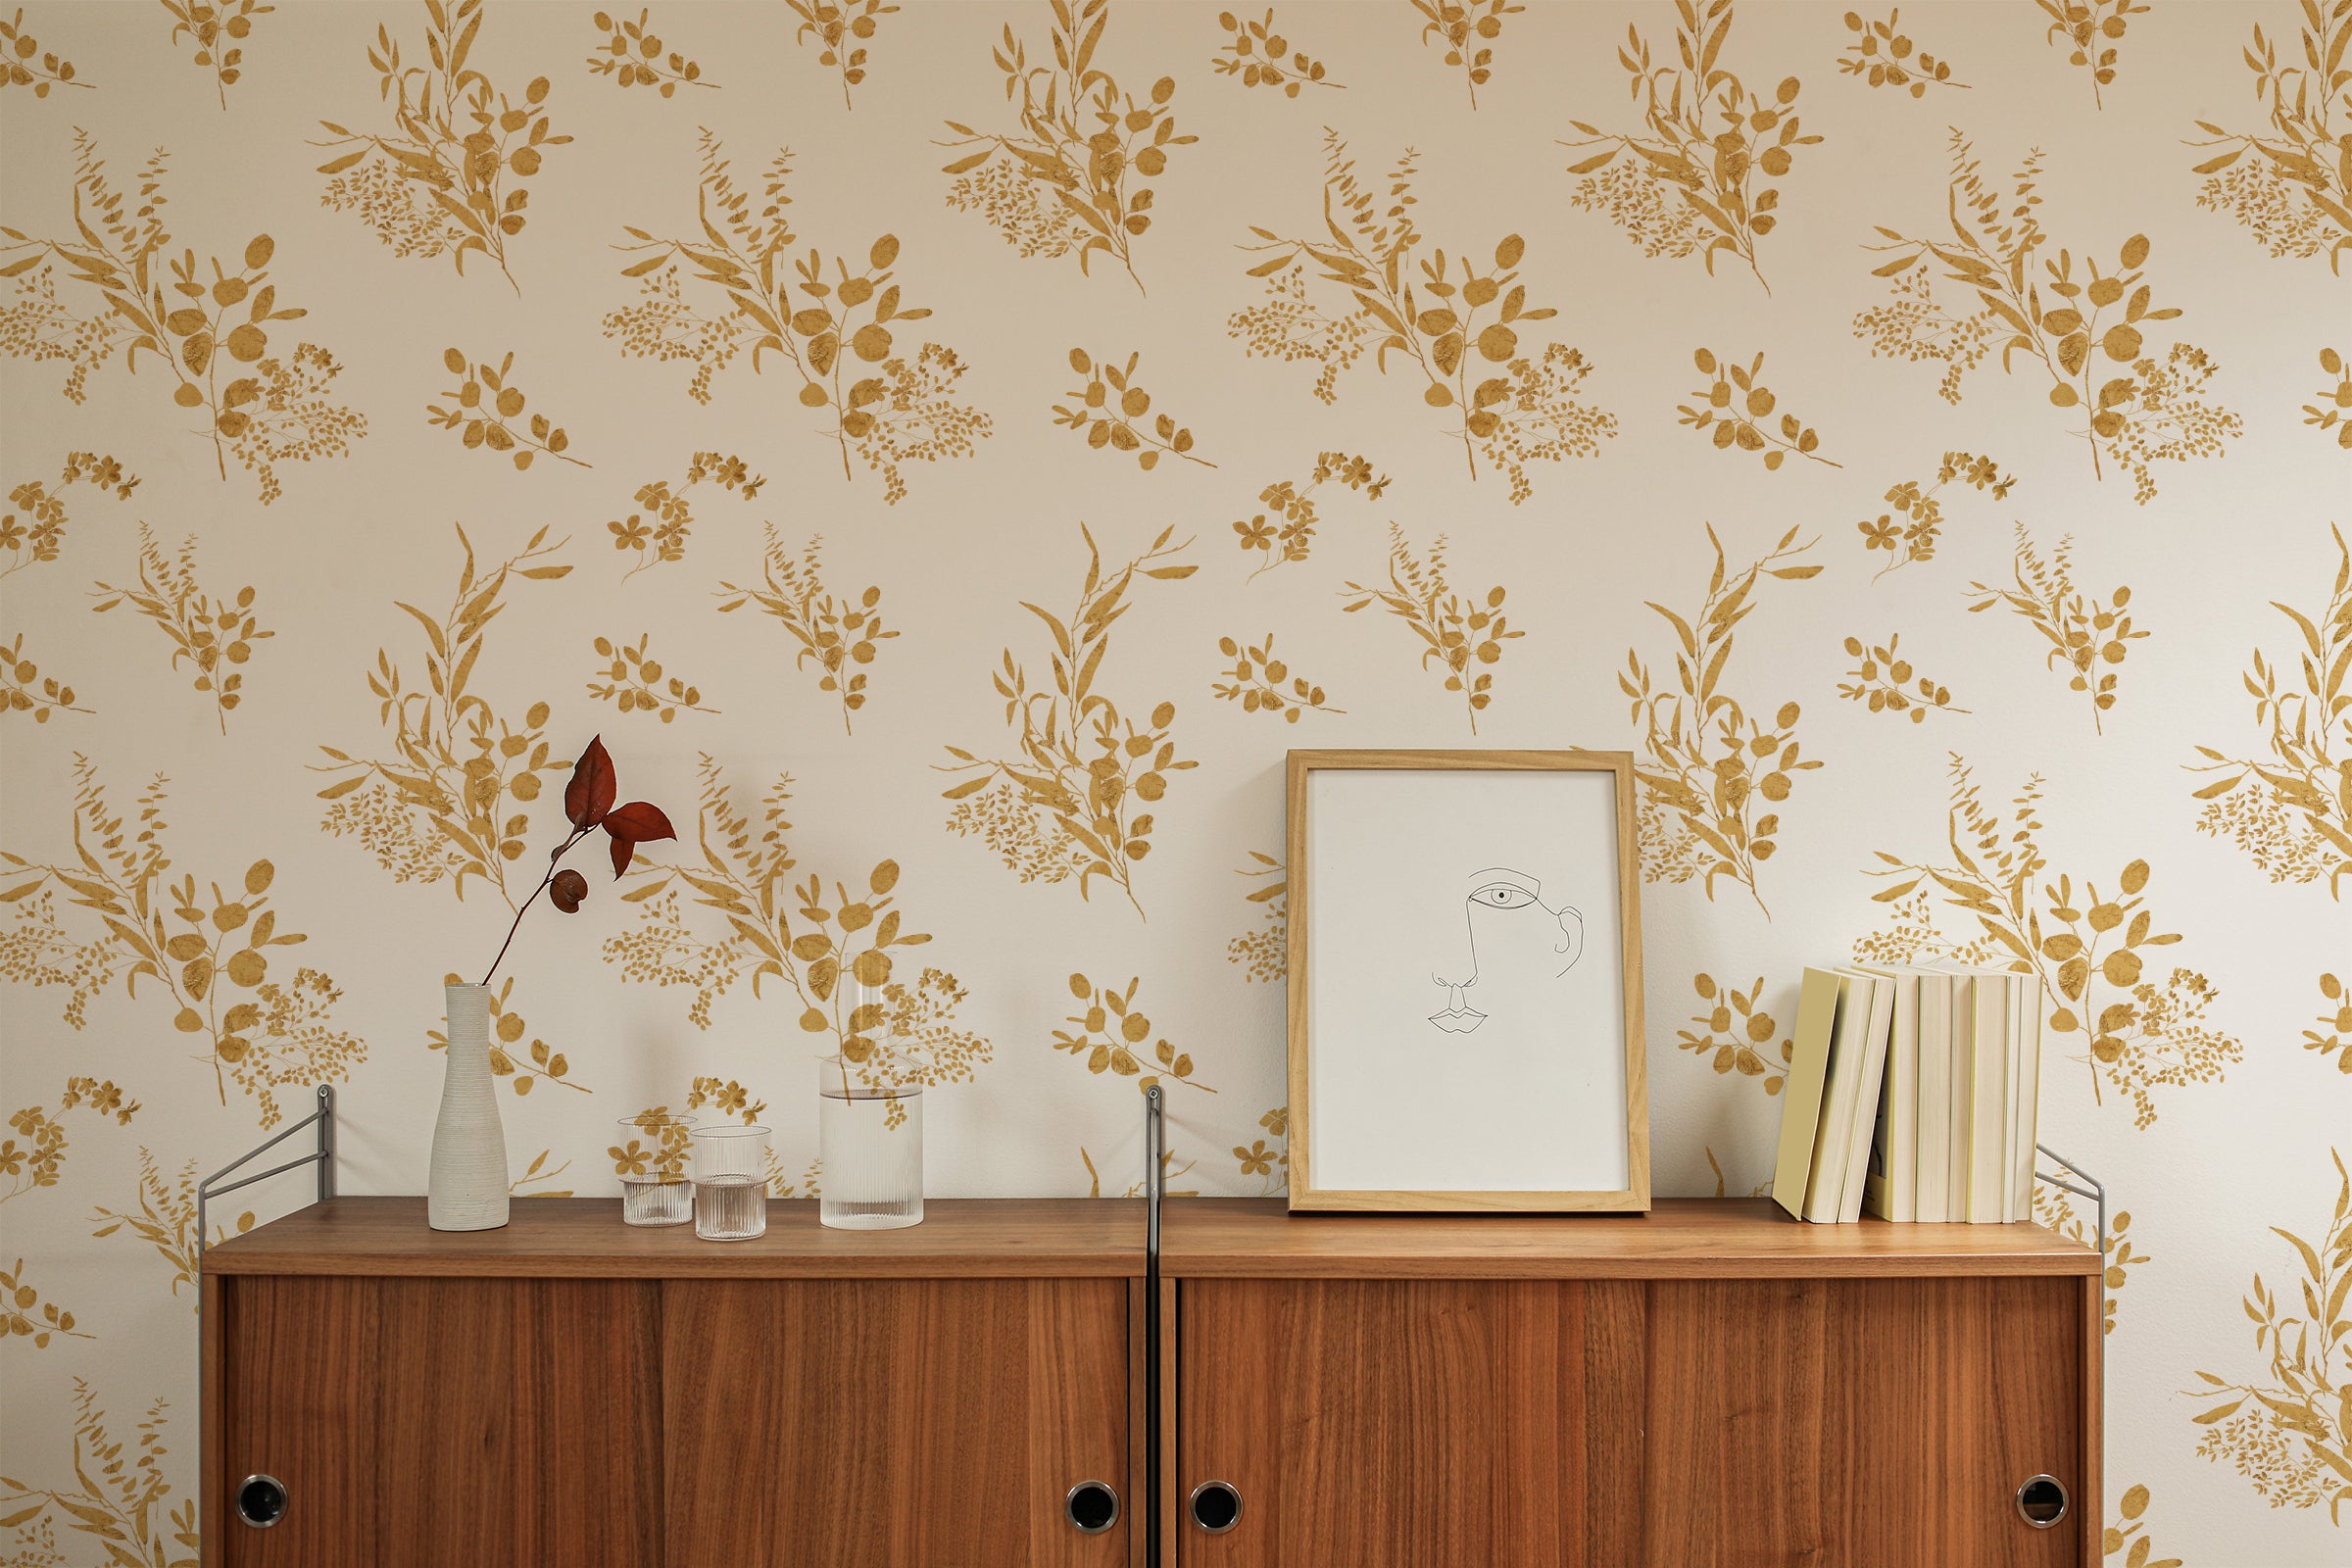 A minimalist decor arrangement against the Golden Greenery Wallpaper. A simple, modern wooden cabinet under the wallpaper is adorned with a small, elegant vase with a single dried plant, books, and glass containers, emphasizing simplicity and natural tones.